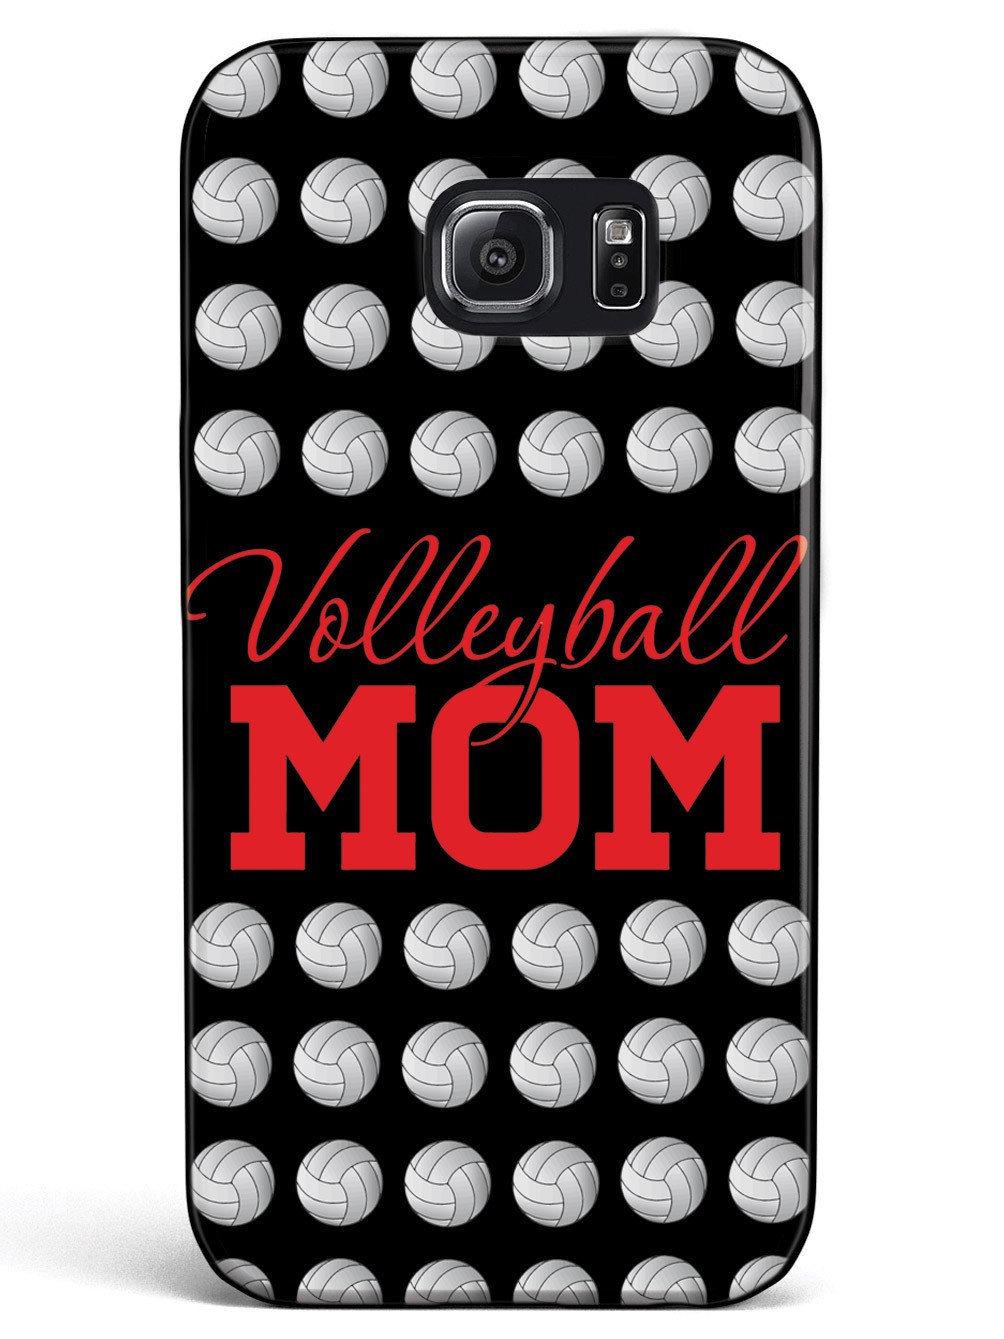 Volleyball Mom Case